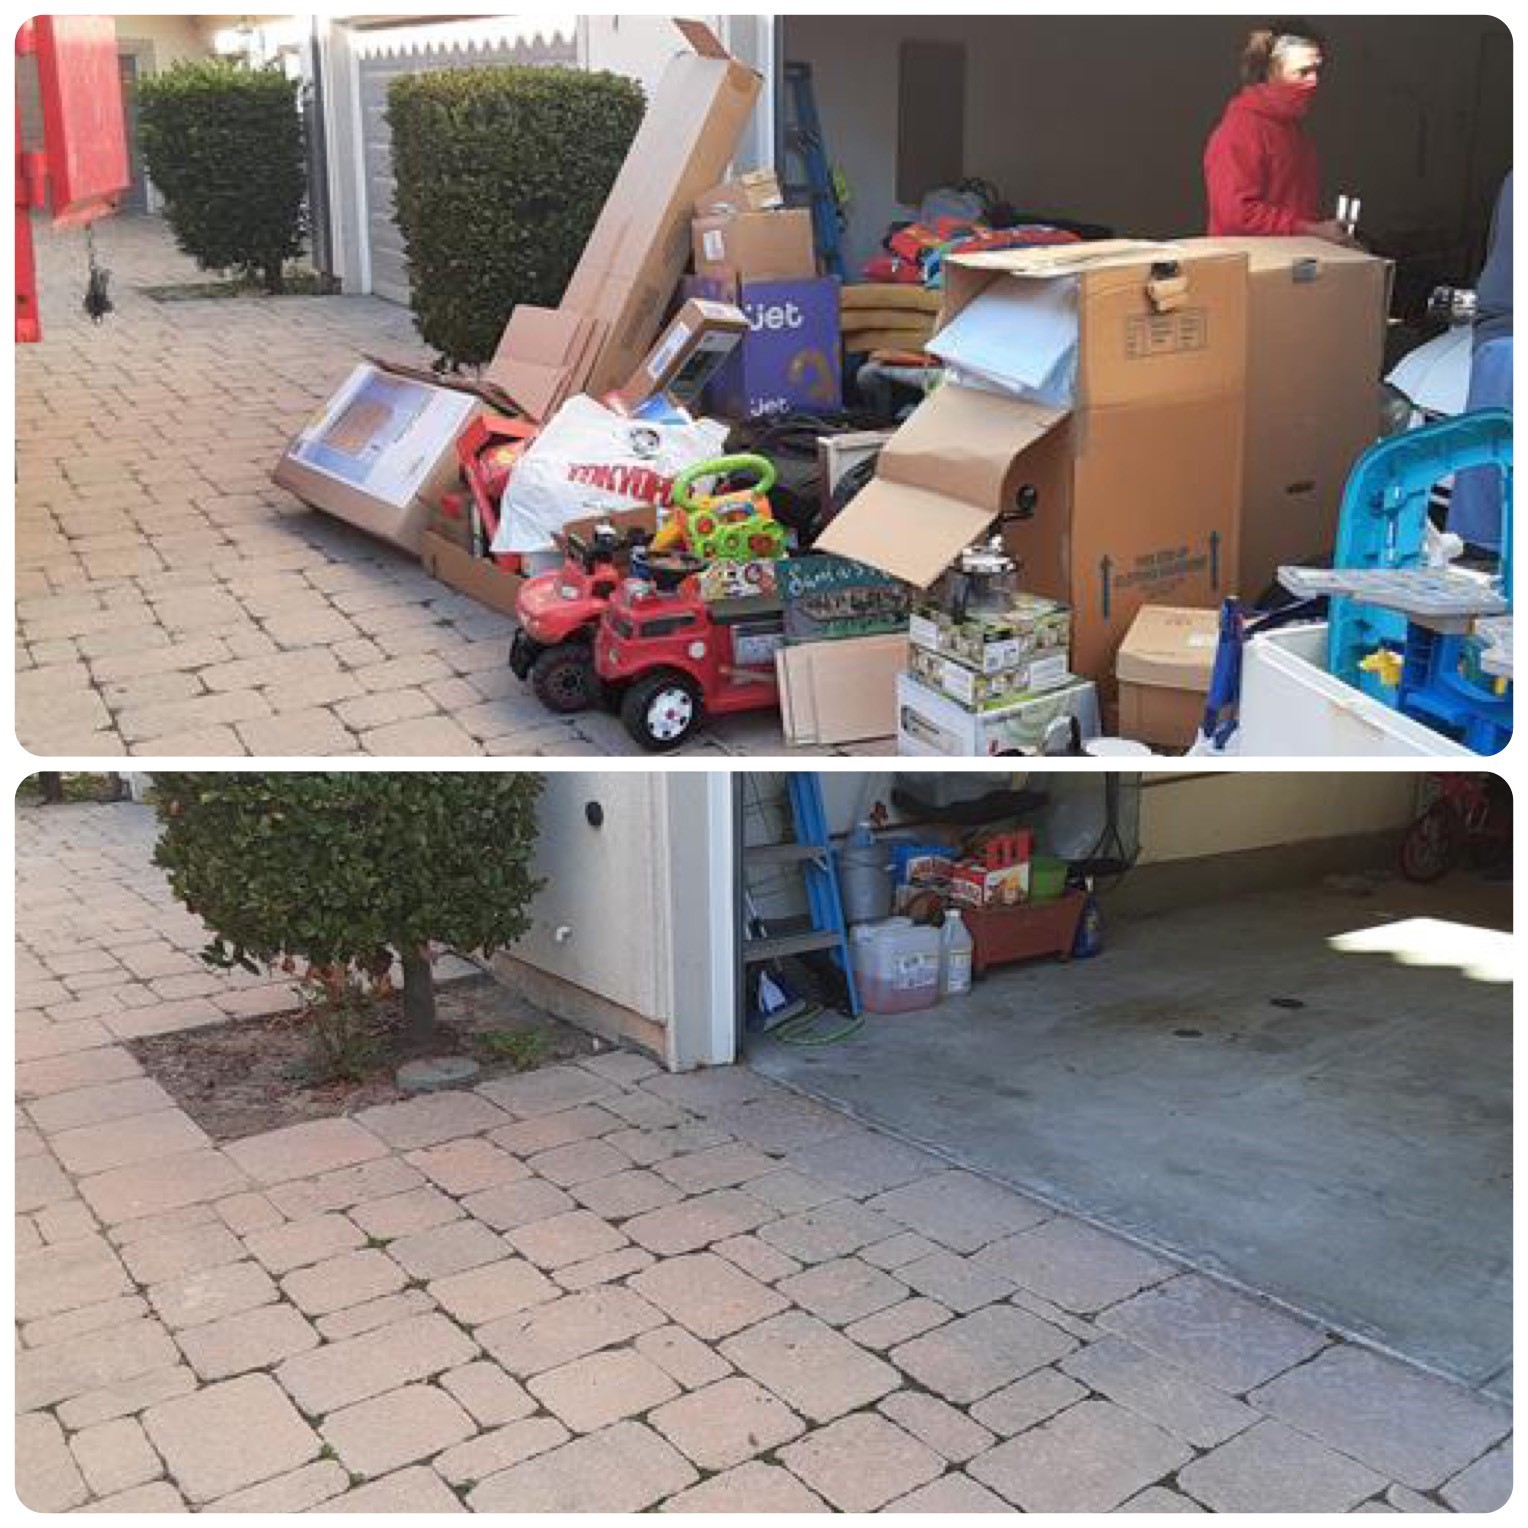 Before and after photo from a recent Junk King junk removal job. At Junk King we haul just about anything from kids toys to construction debris and all the miscellaneous items in between. We try to donate what we can and keep over 60% of our hauls out of the landfills. Call Junk King today for your next junk hauling job!